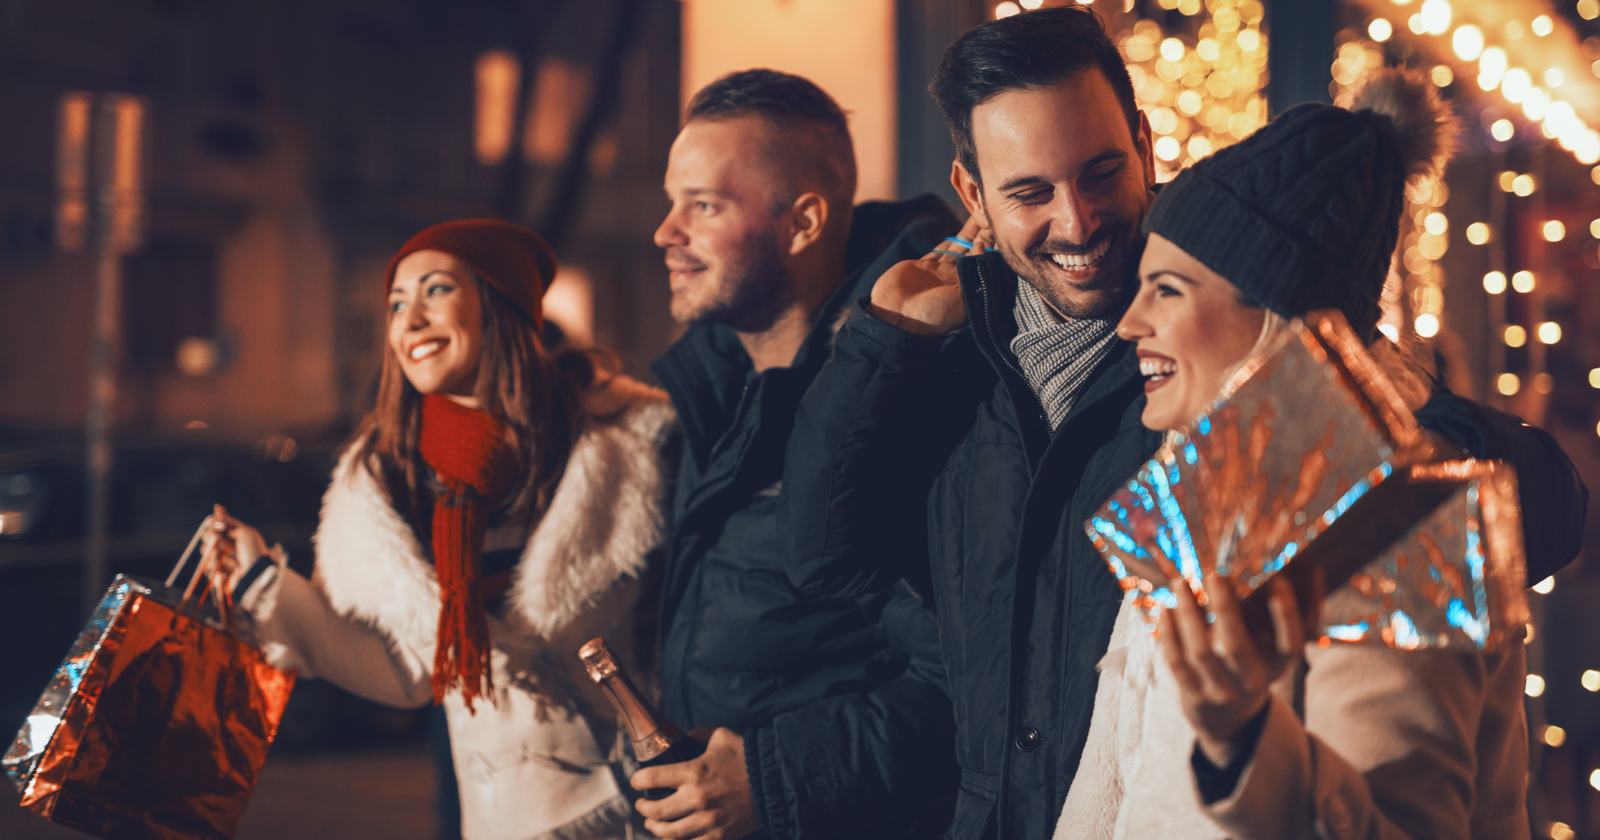 4 Insider Search Tips to Influence Holiday Shoppers